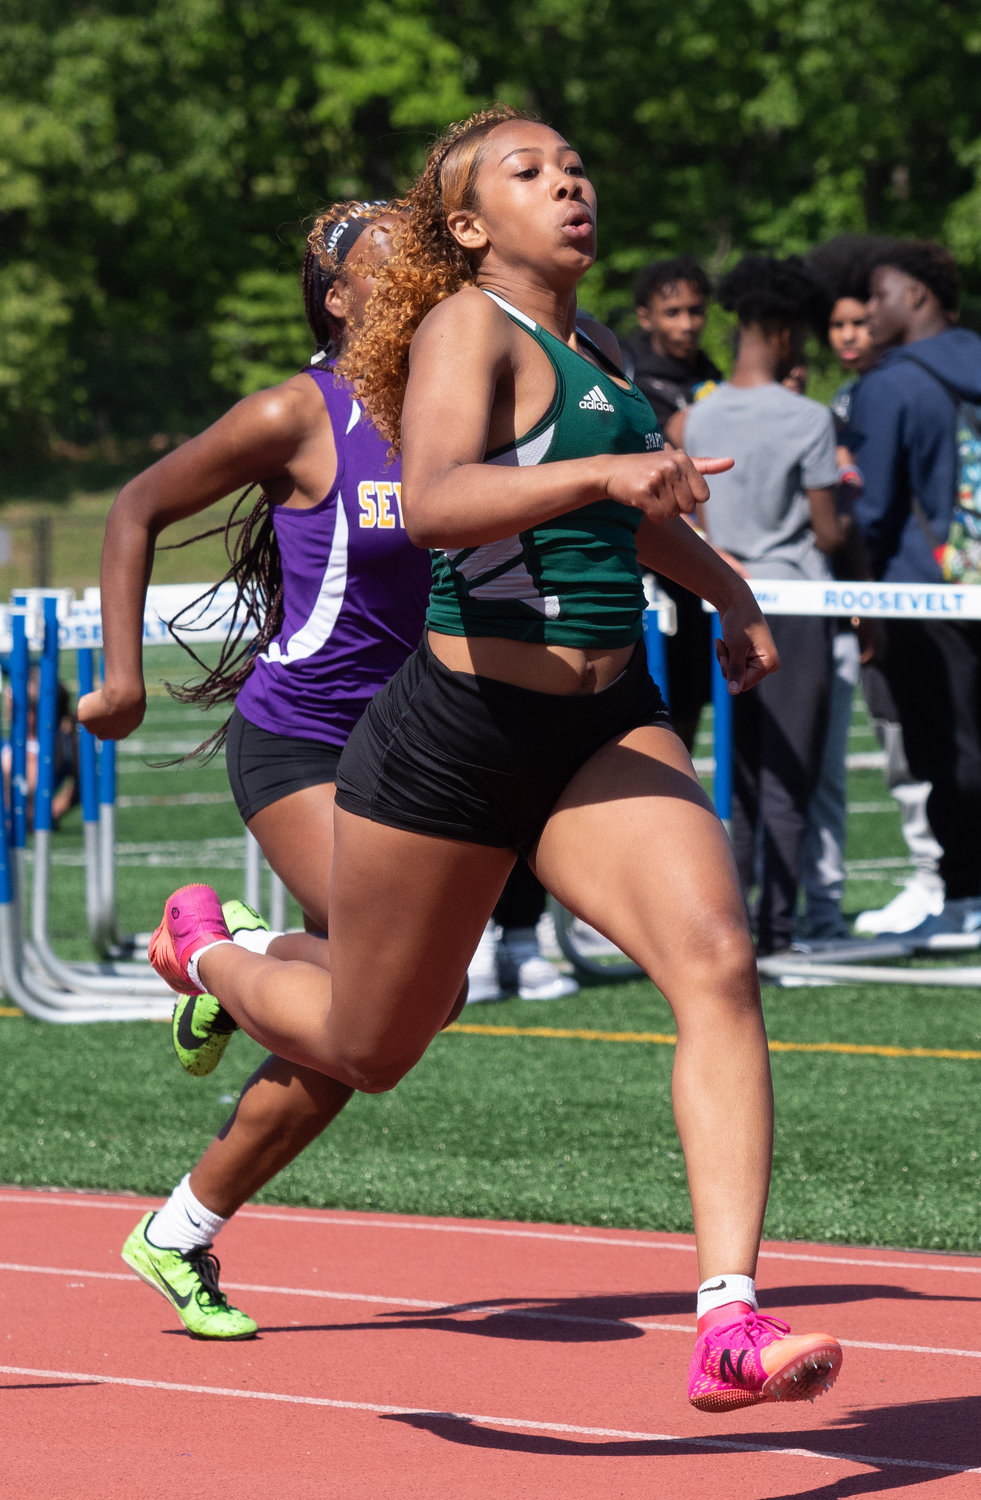 Ariana Paul won the Nassau Class AA titles in the 100m dash and long jump, and totaled 24 points in the county meet.